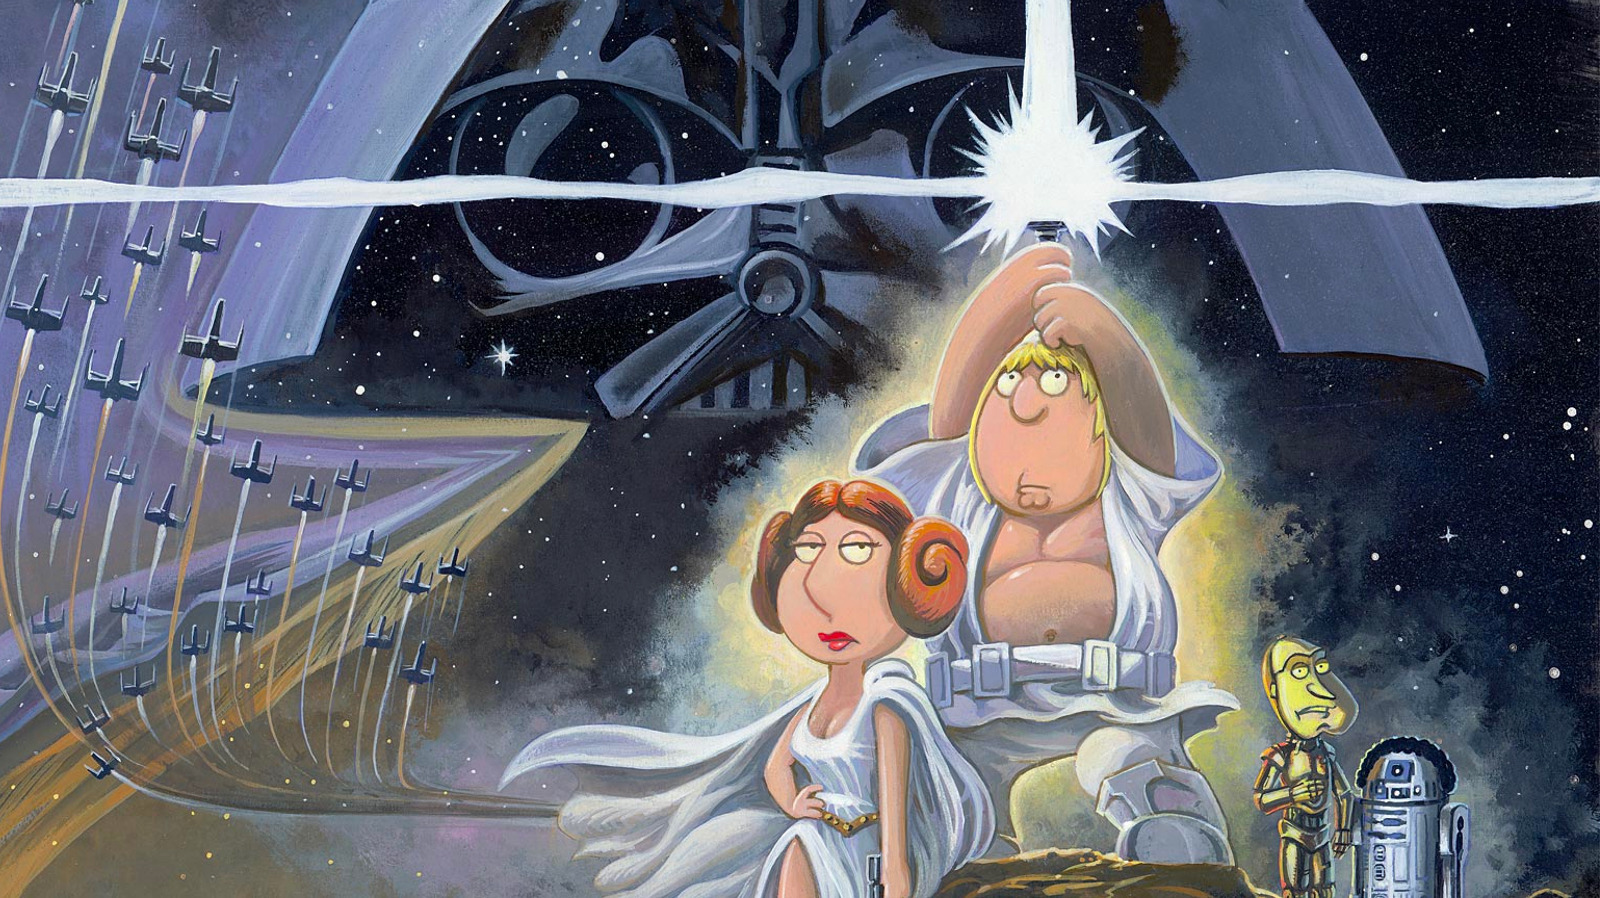 Family Guy's Star Wars Episode Is Called Blue Harvest For A Very Geeky Reason